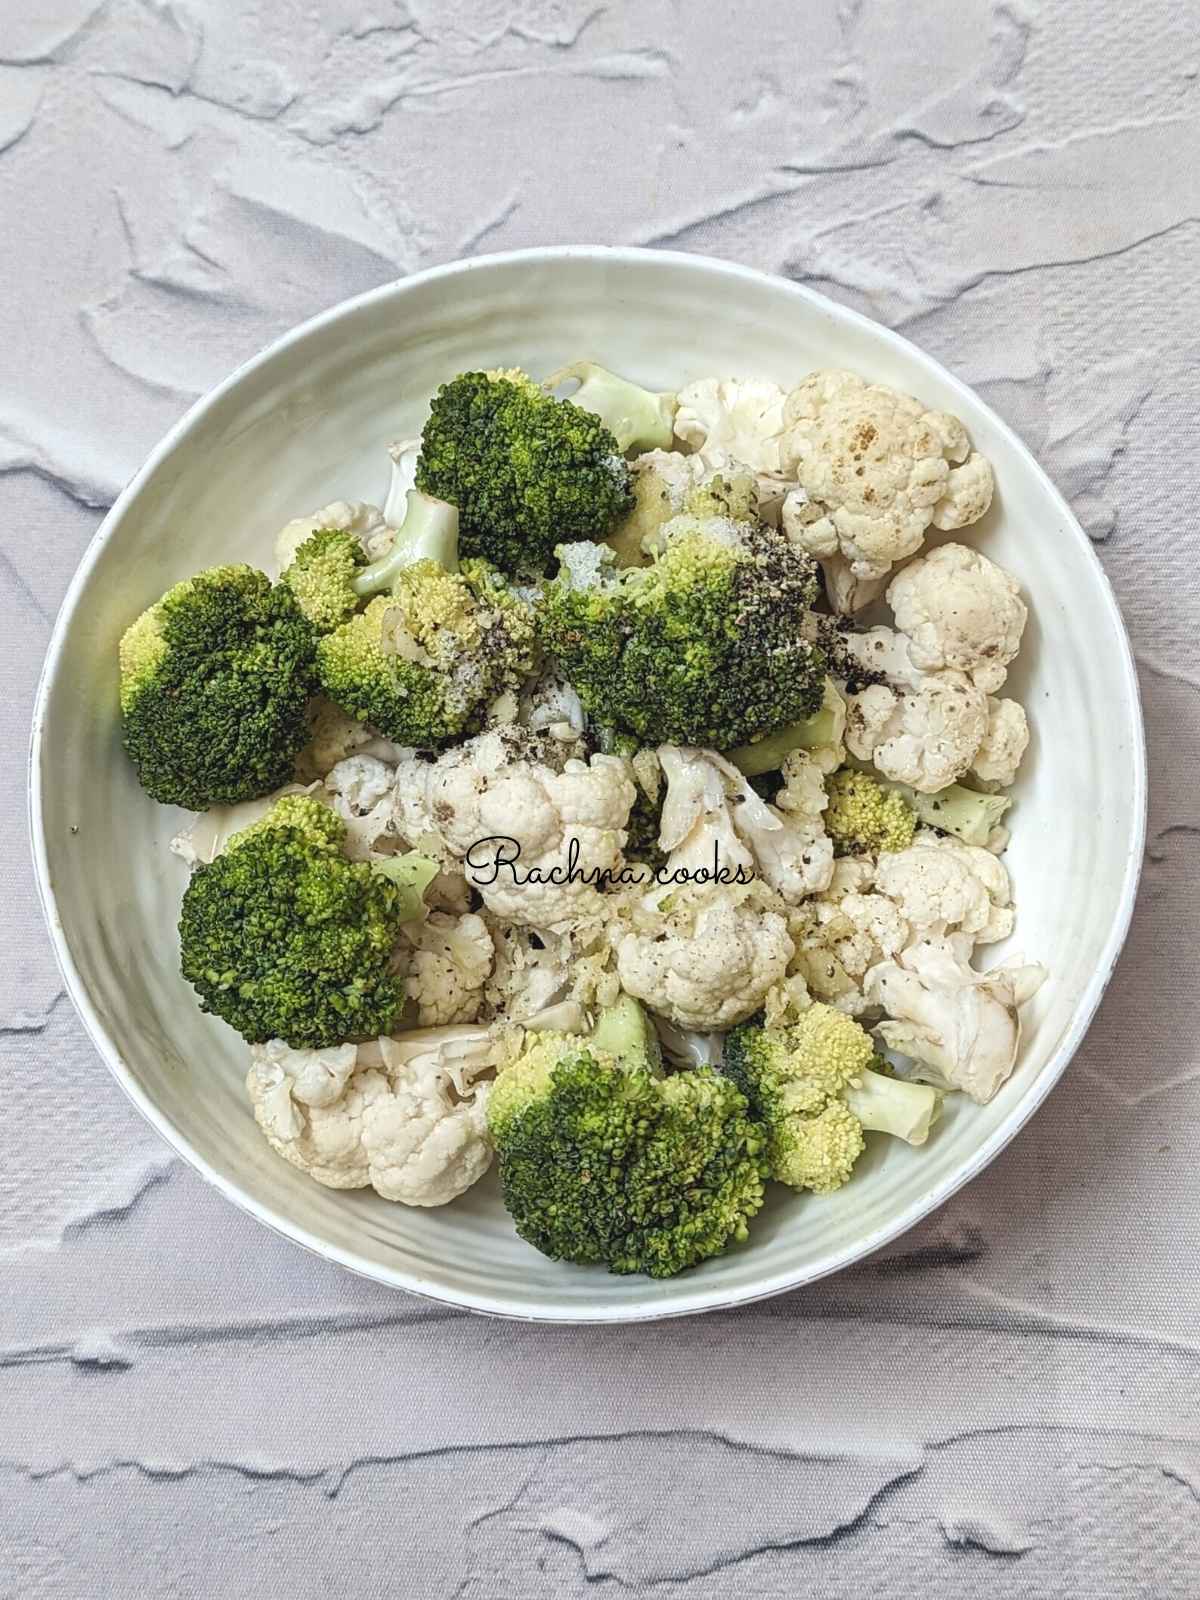 Cauliflower and broccoli florets in a bowl.